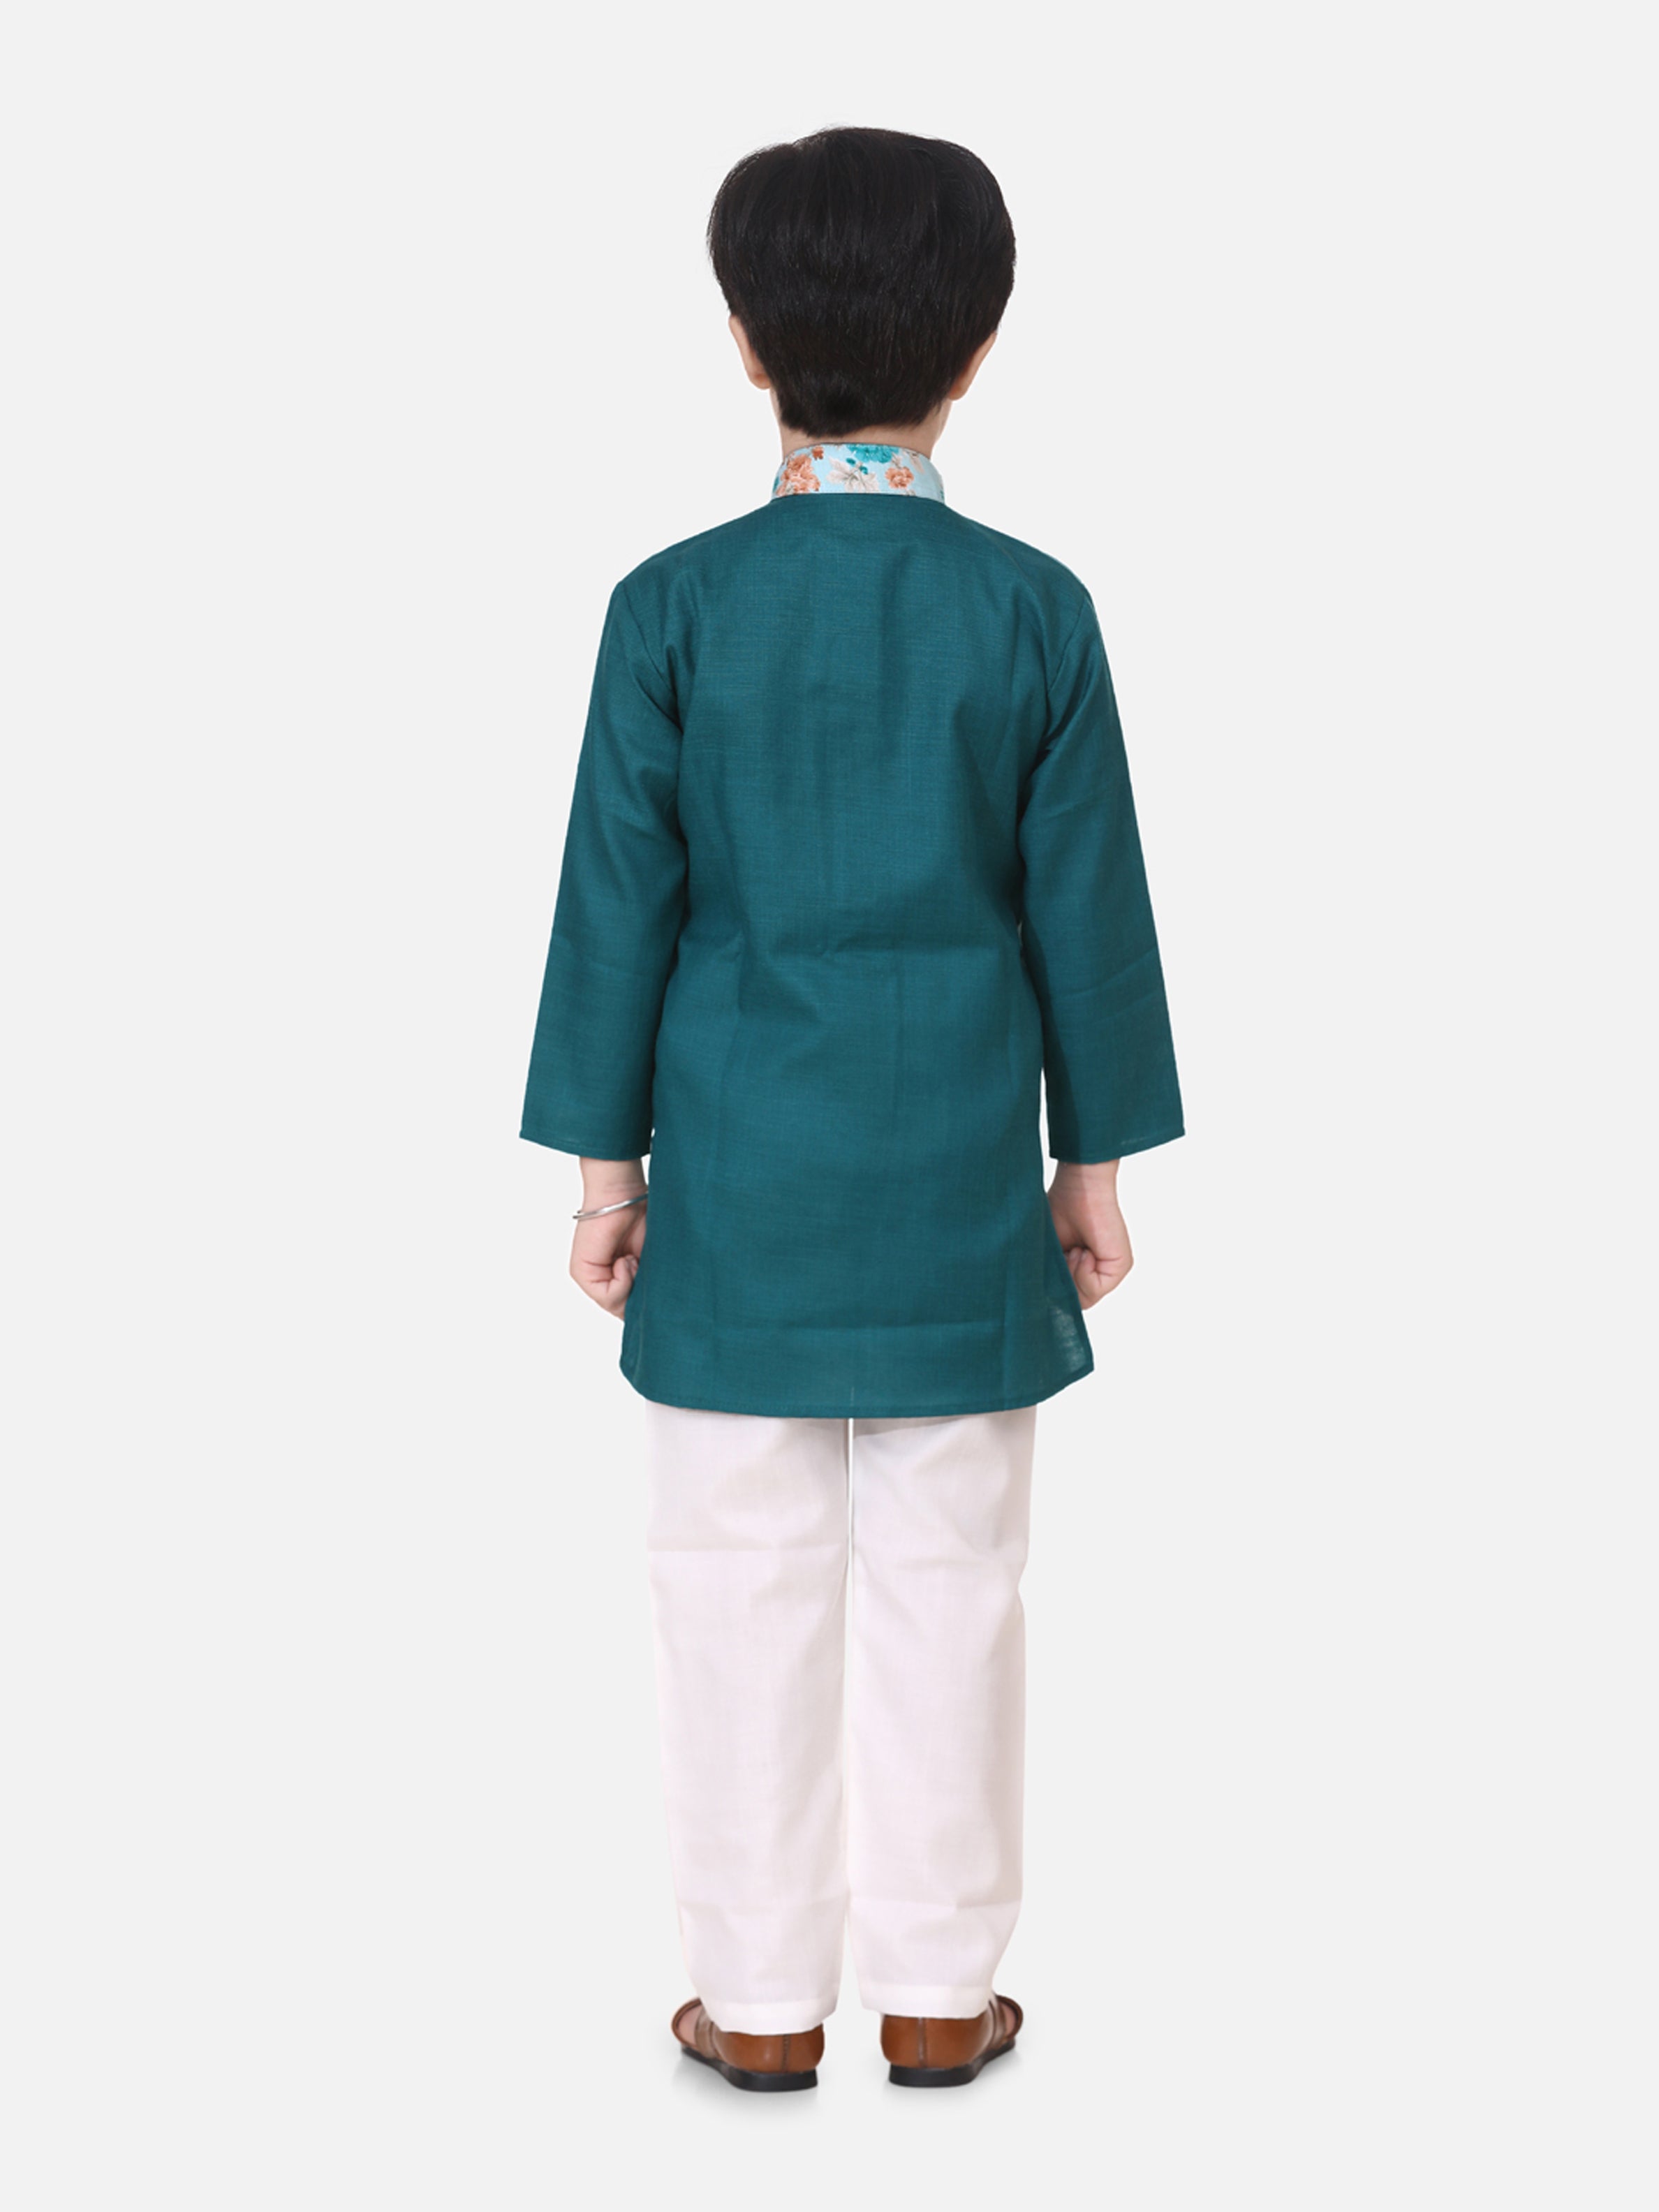 BownBee Attached Floral print Jacket Cotton Kurta Pajama For Boys-Green